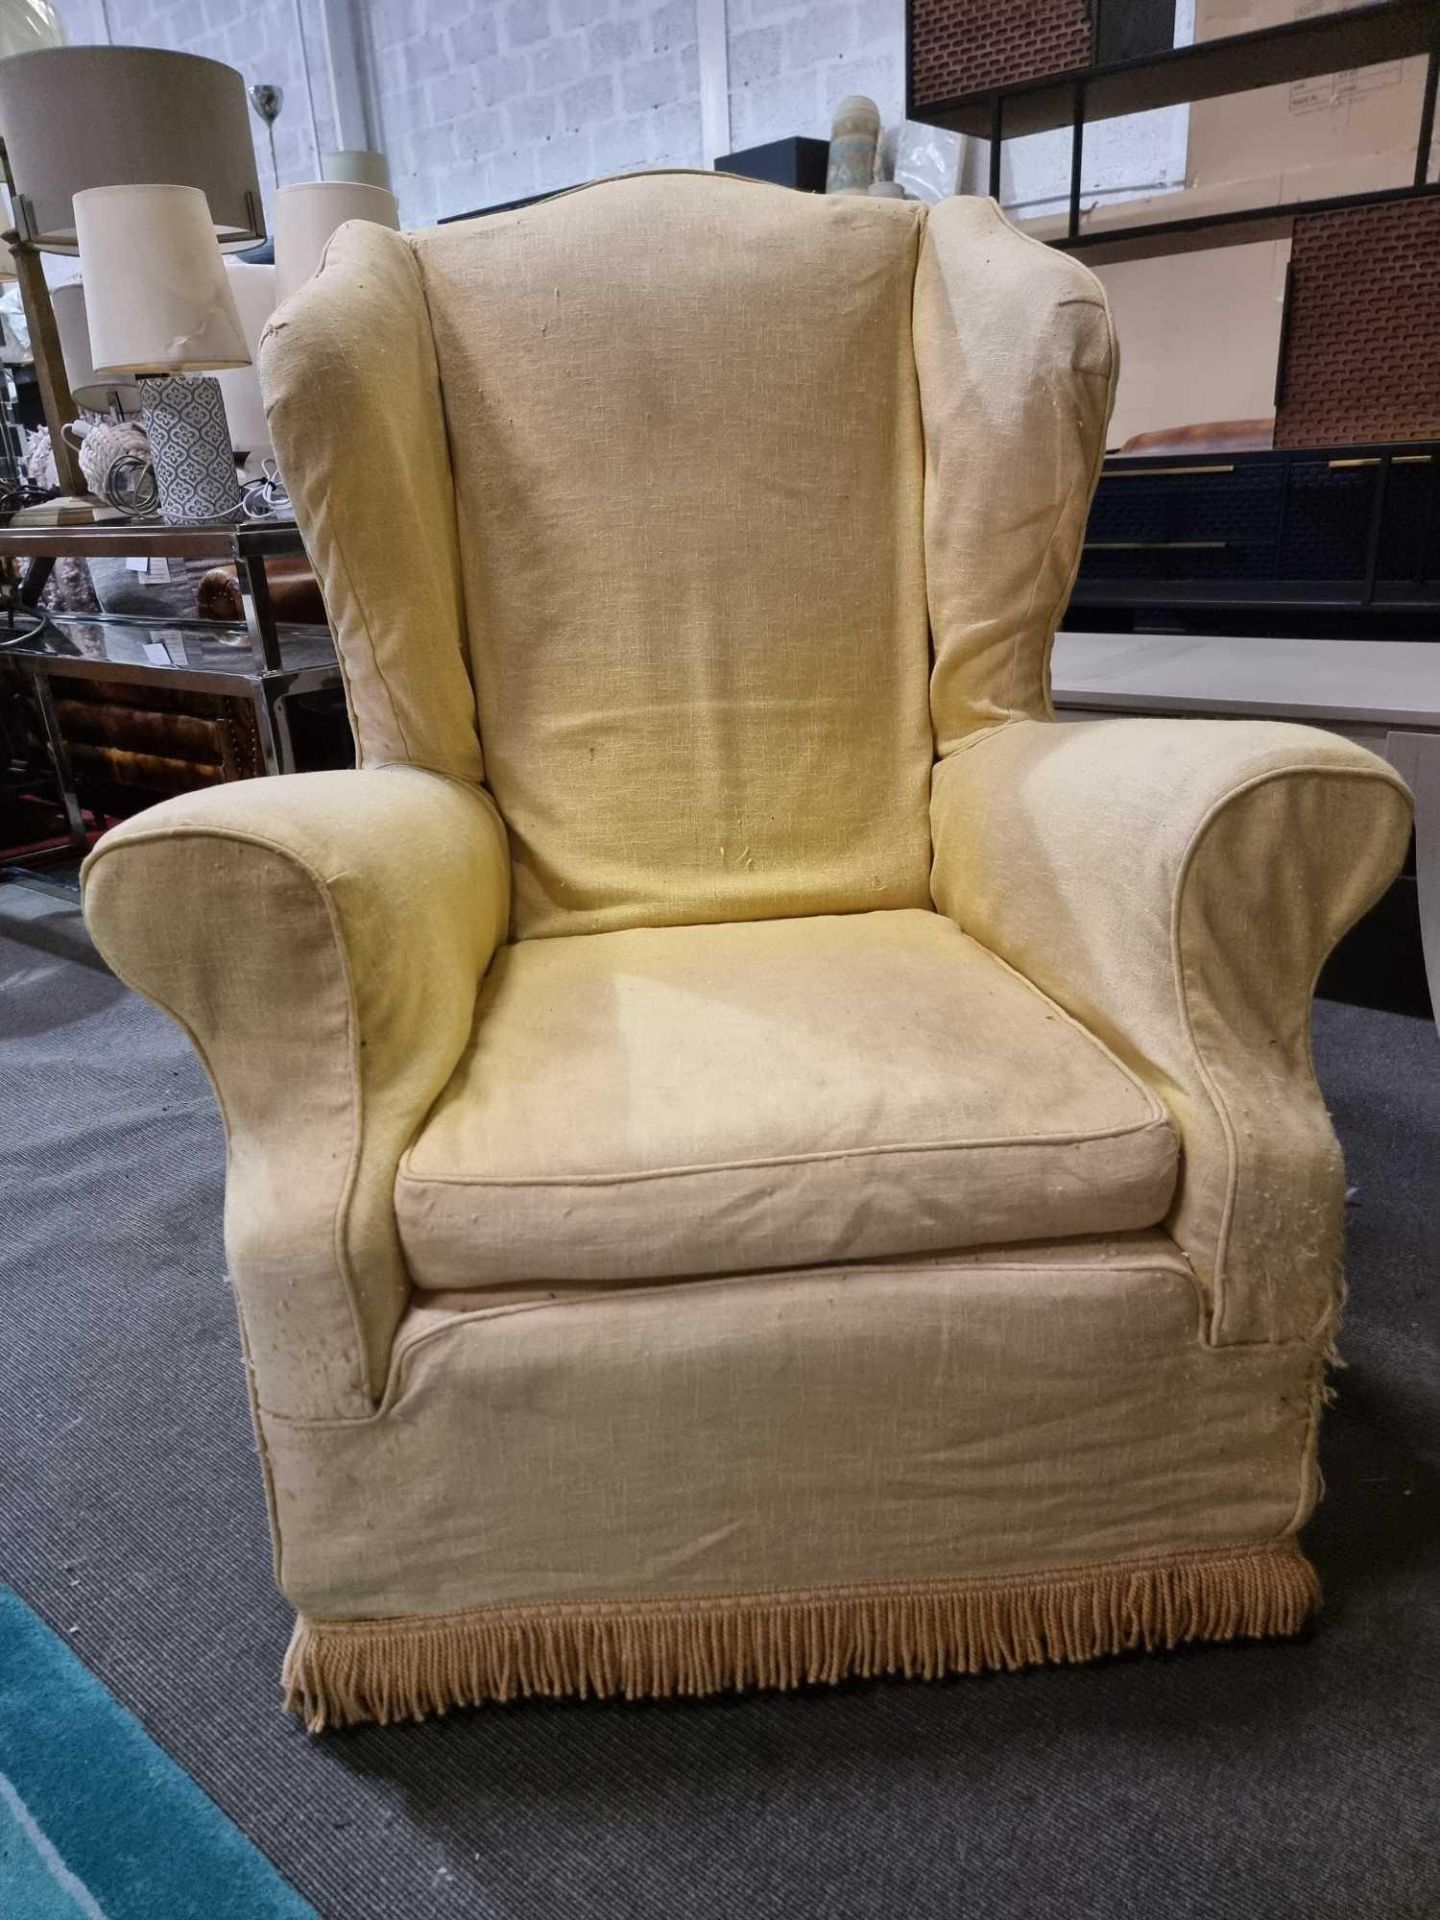 Wing Back Armchair Classic Styled Wing Arm Chair Framed And Upholstered In A Gold Yellow Cover - Bild 7 aus 7